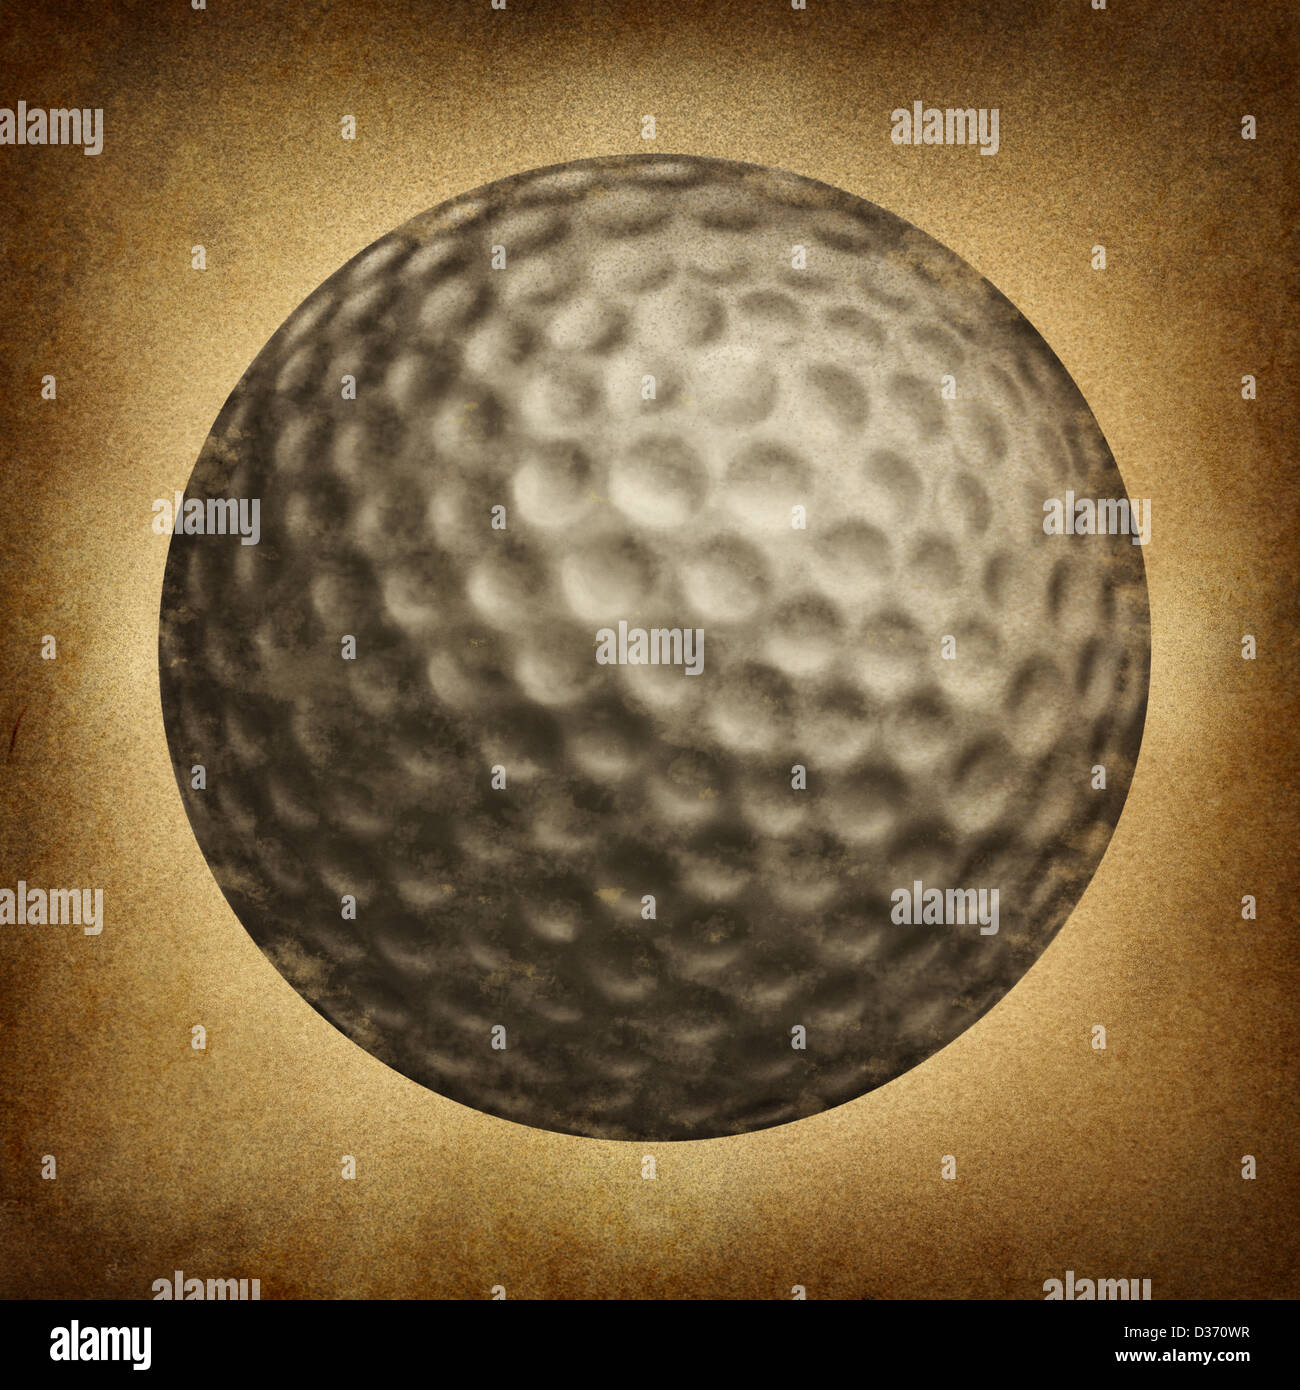 Golf ball in an old vintage grunge texture on parchement paper as a traditional sporting symbol of an individual leisure game played on an eighteen hole course. Stock Photo